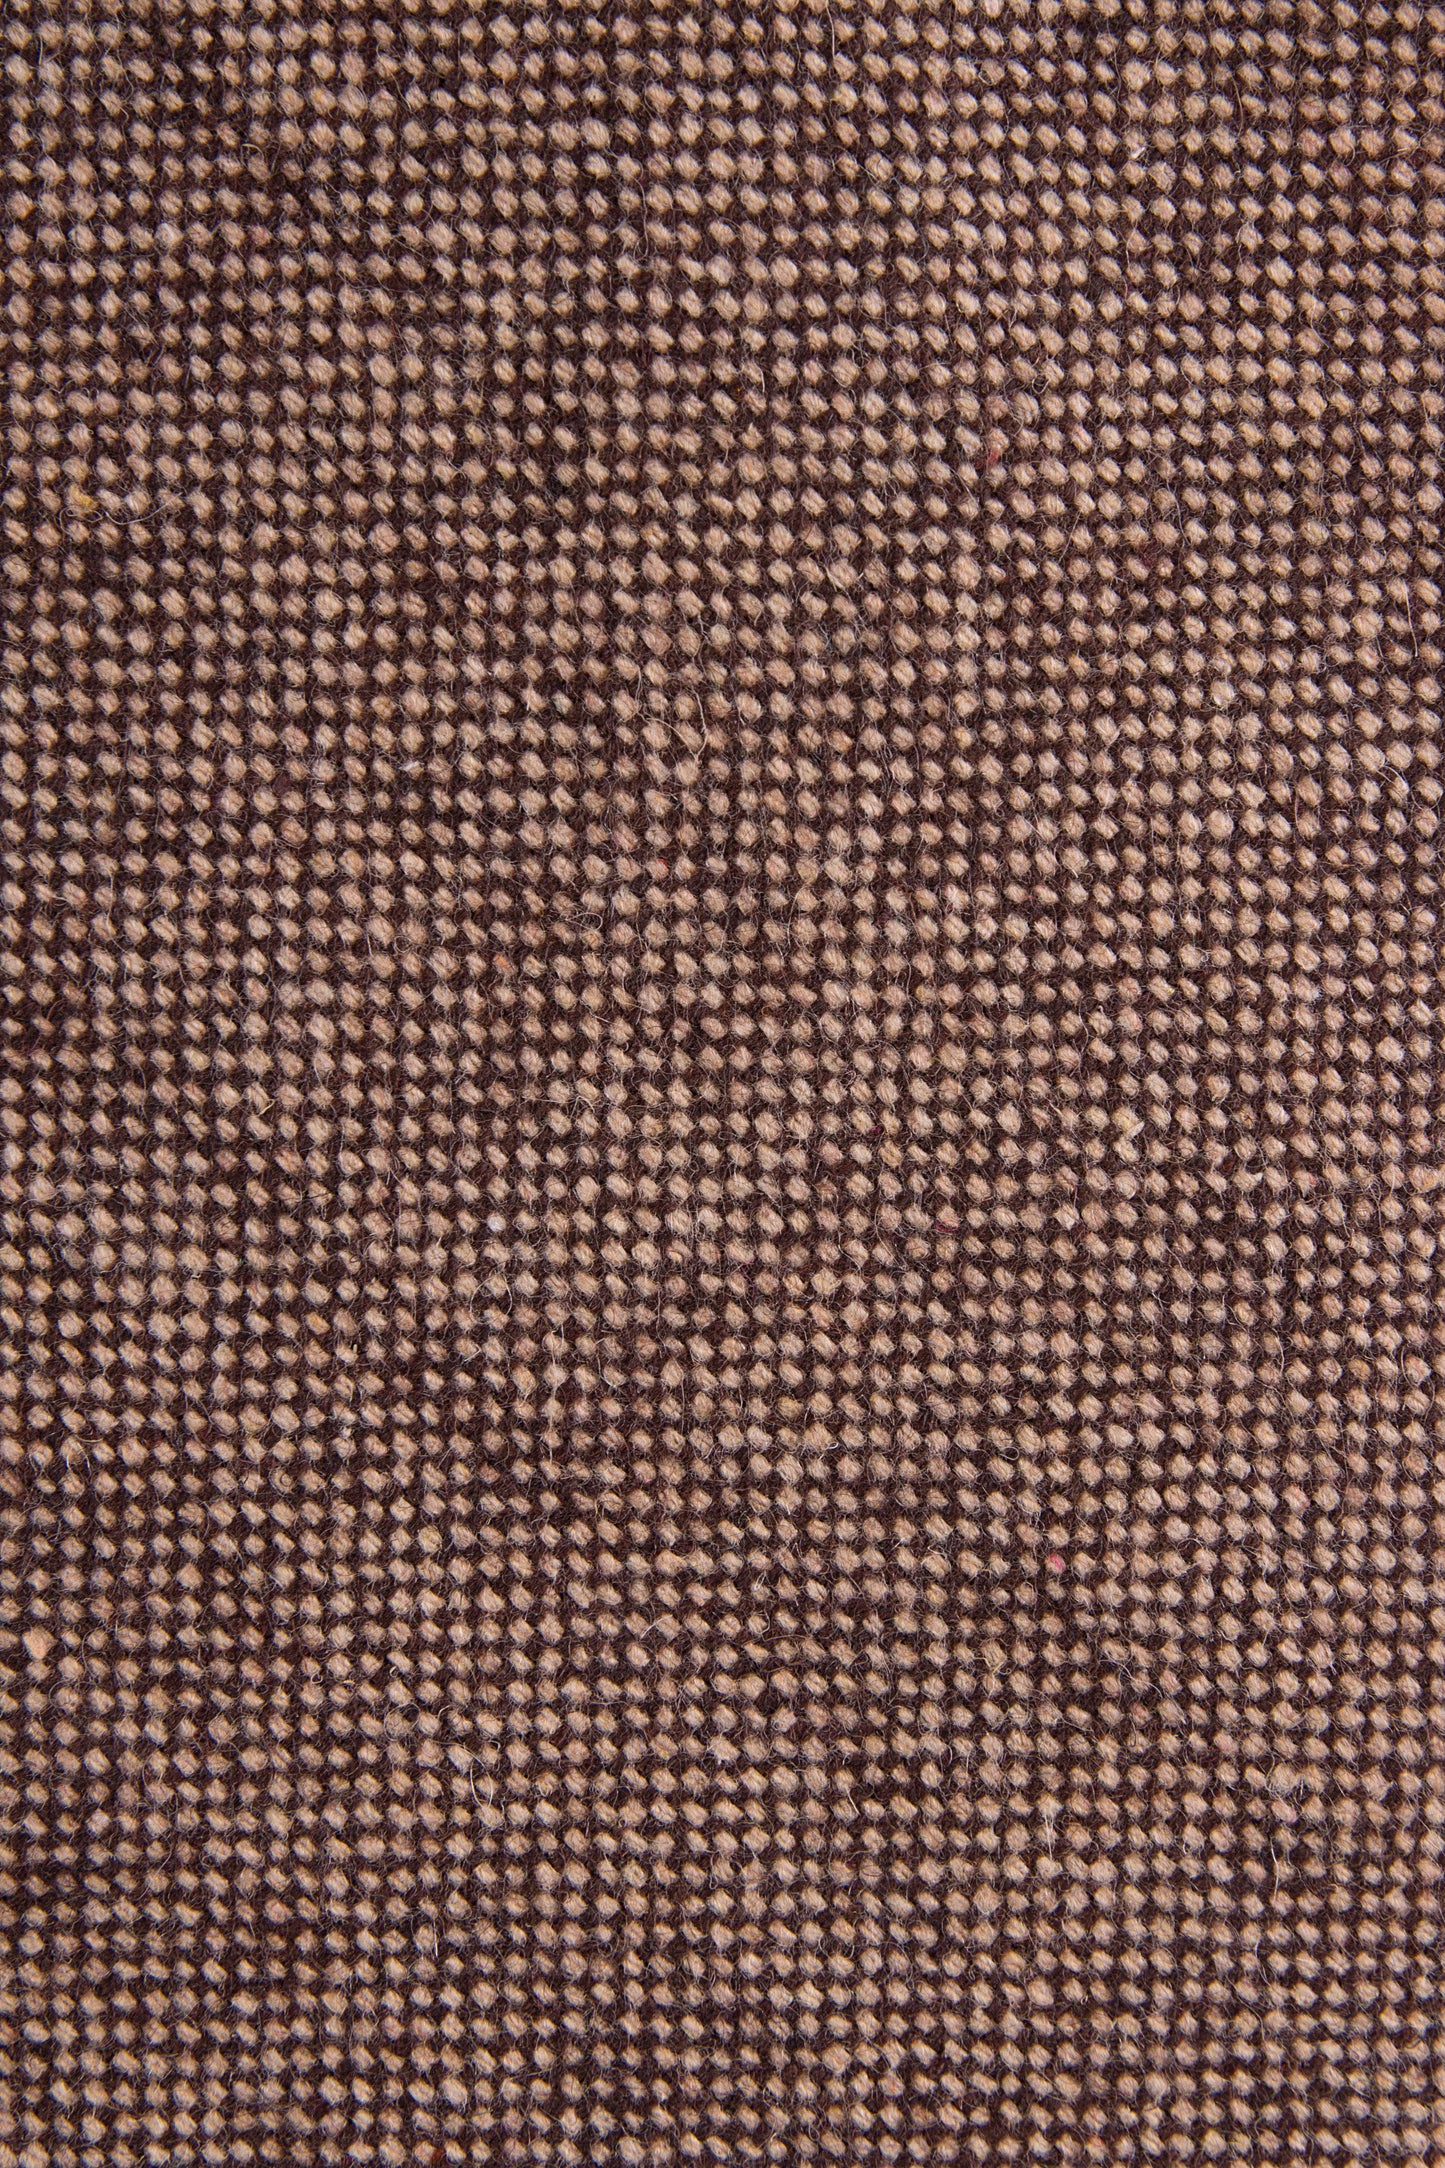 Close up of Classic Brown Barleycorn Tweed Tie by Empire Outlet Luxury Menswear